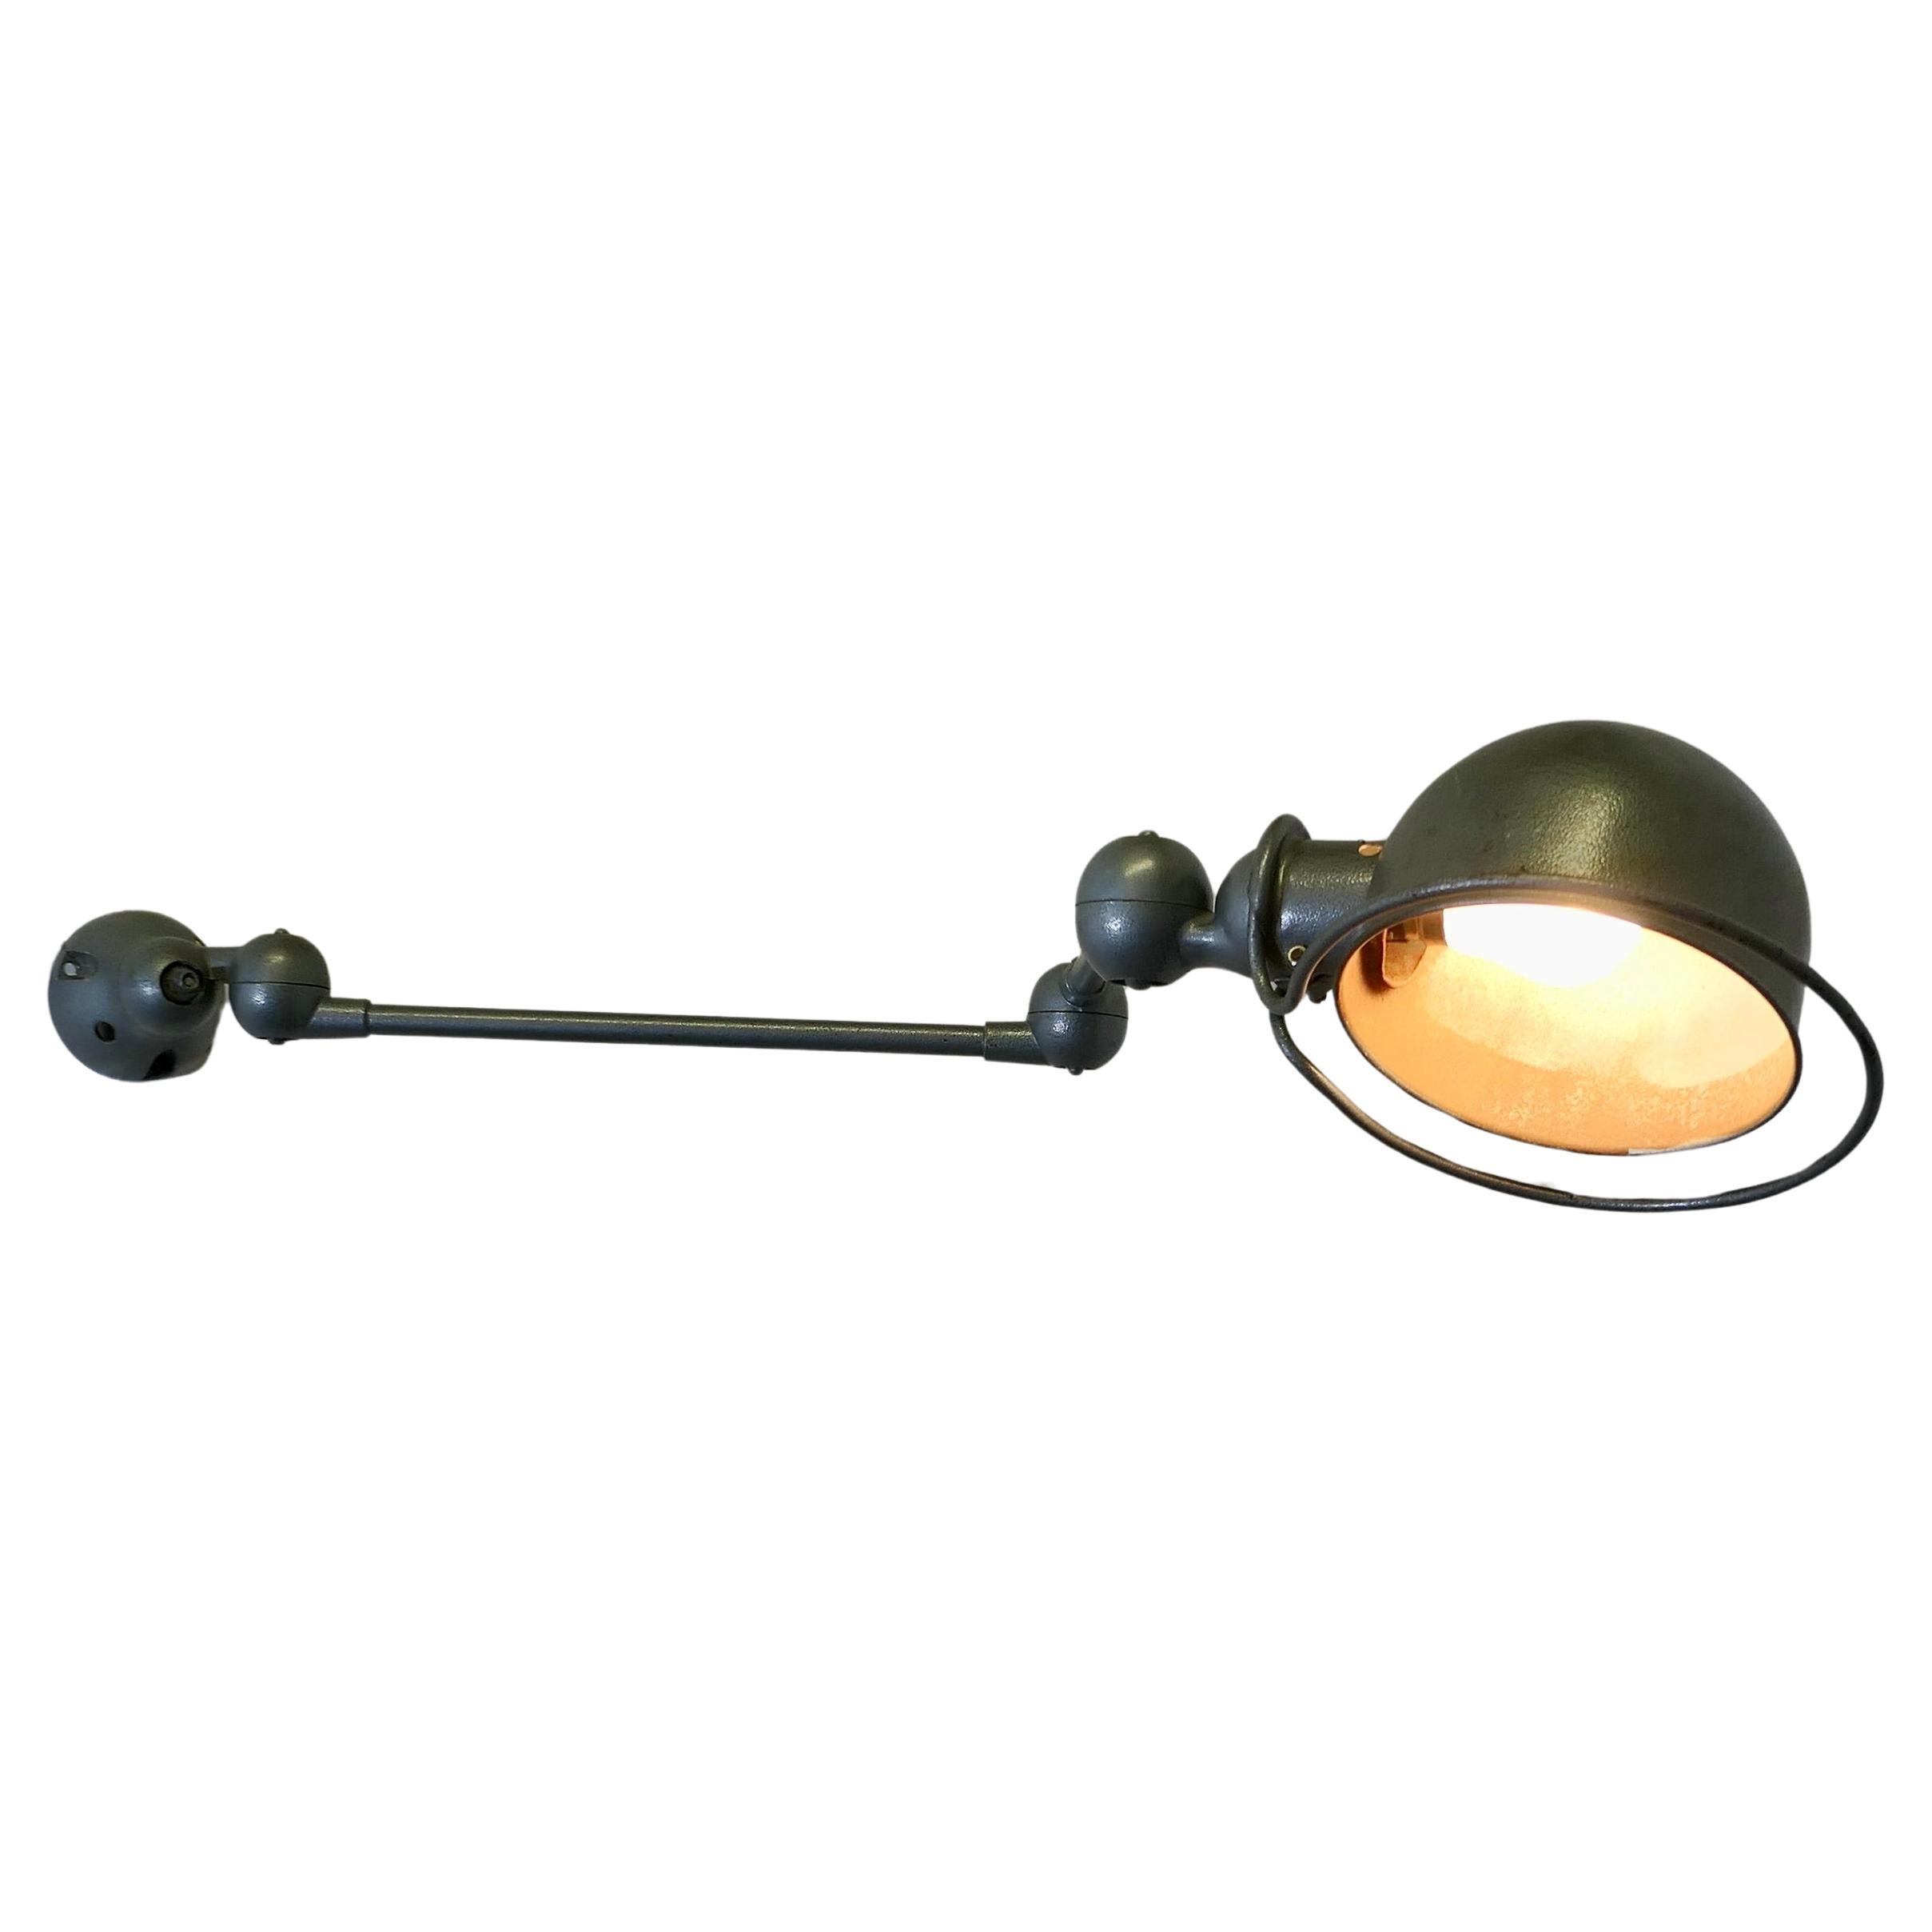 French Vintage Industrial Articulated Wall Light Sconce   